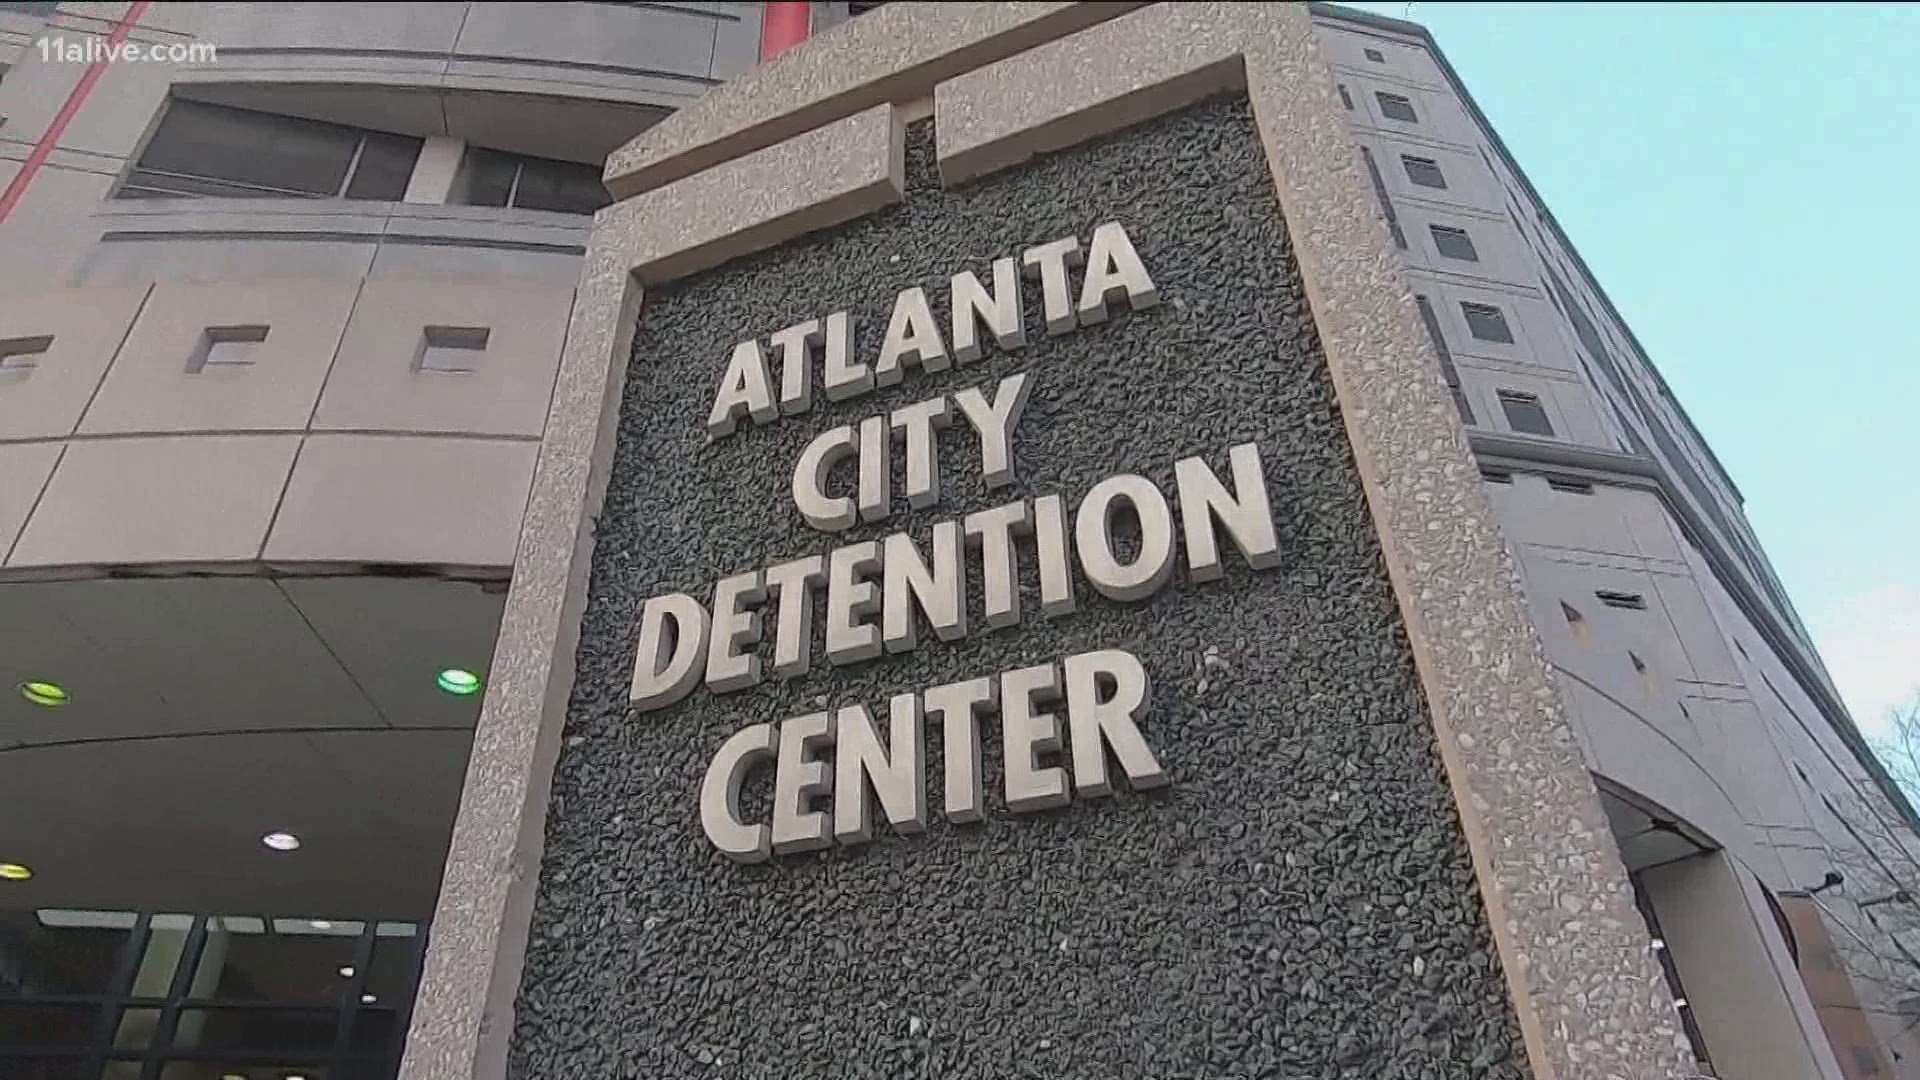 The demand comes after the Atlanta’s 2021 fiscal year budget shows an $18 million-proposal for the Department of Corrections.